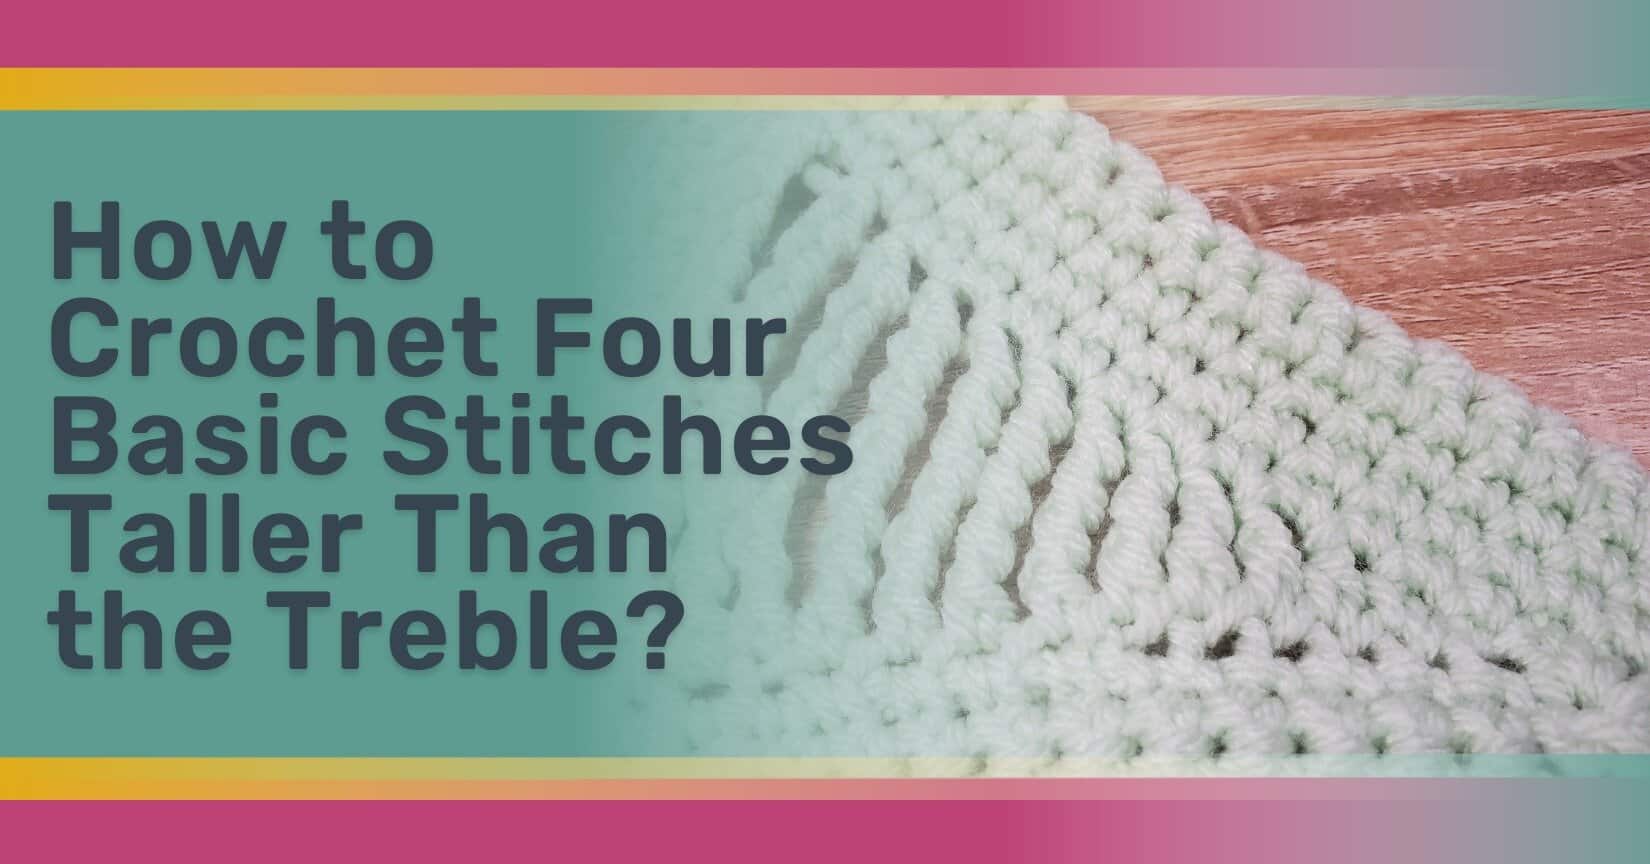 how to crochet four basic stitches taller than the treble